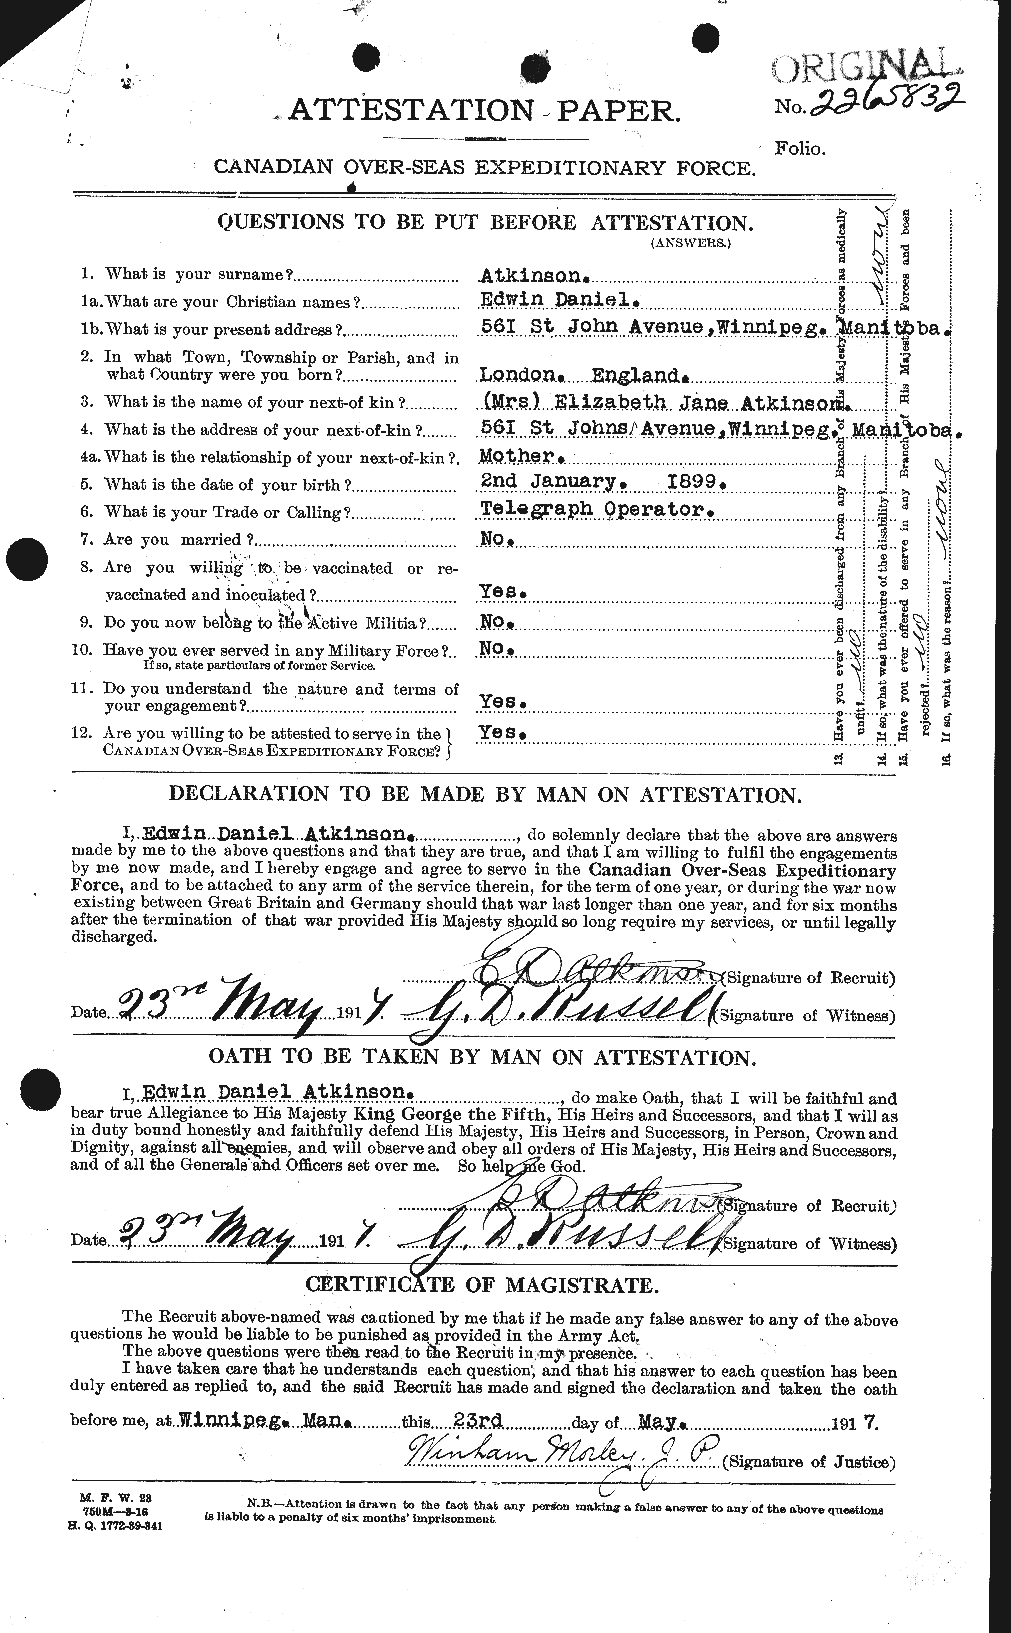 Personnel Records of the First World War - CEF 217487a